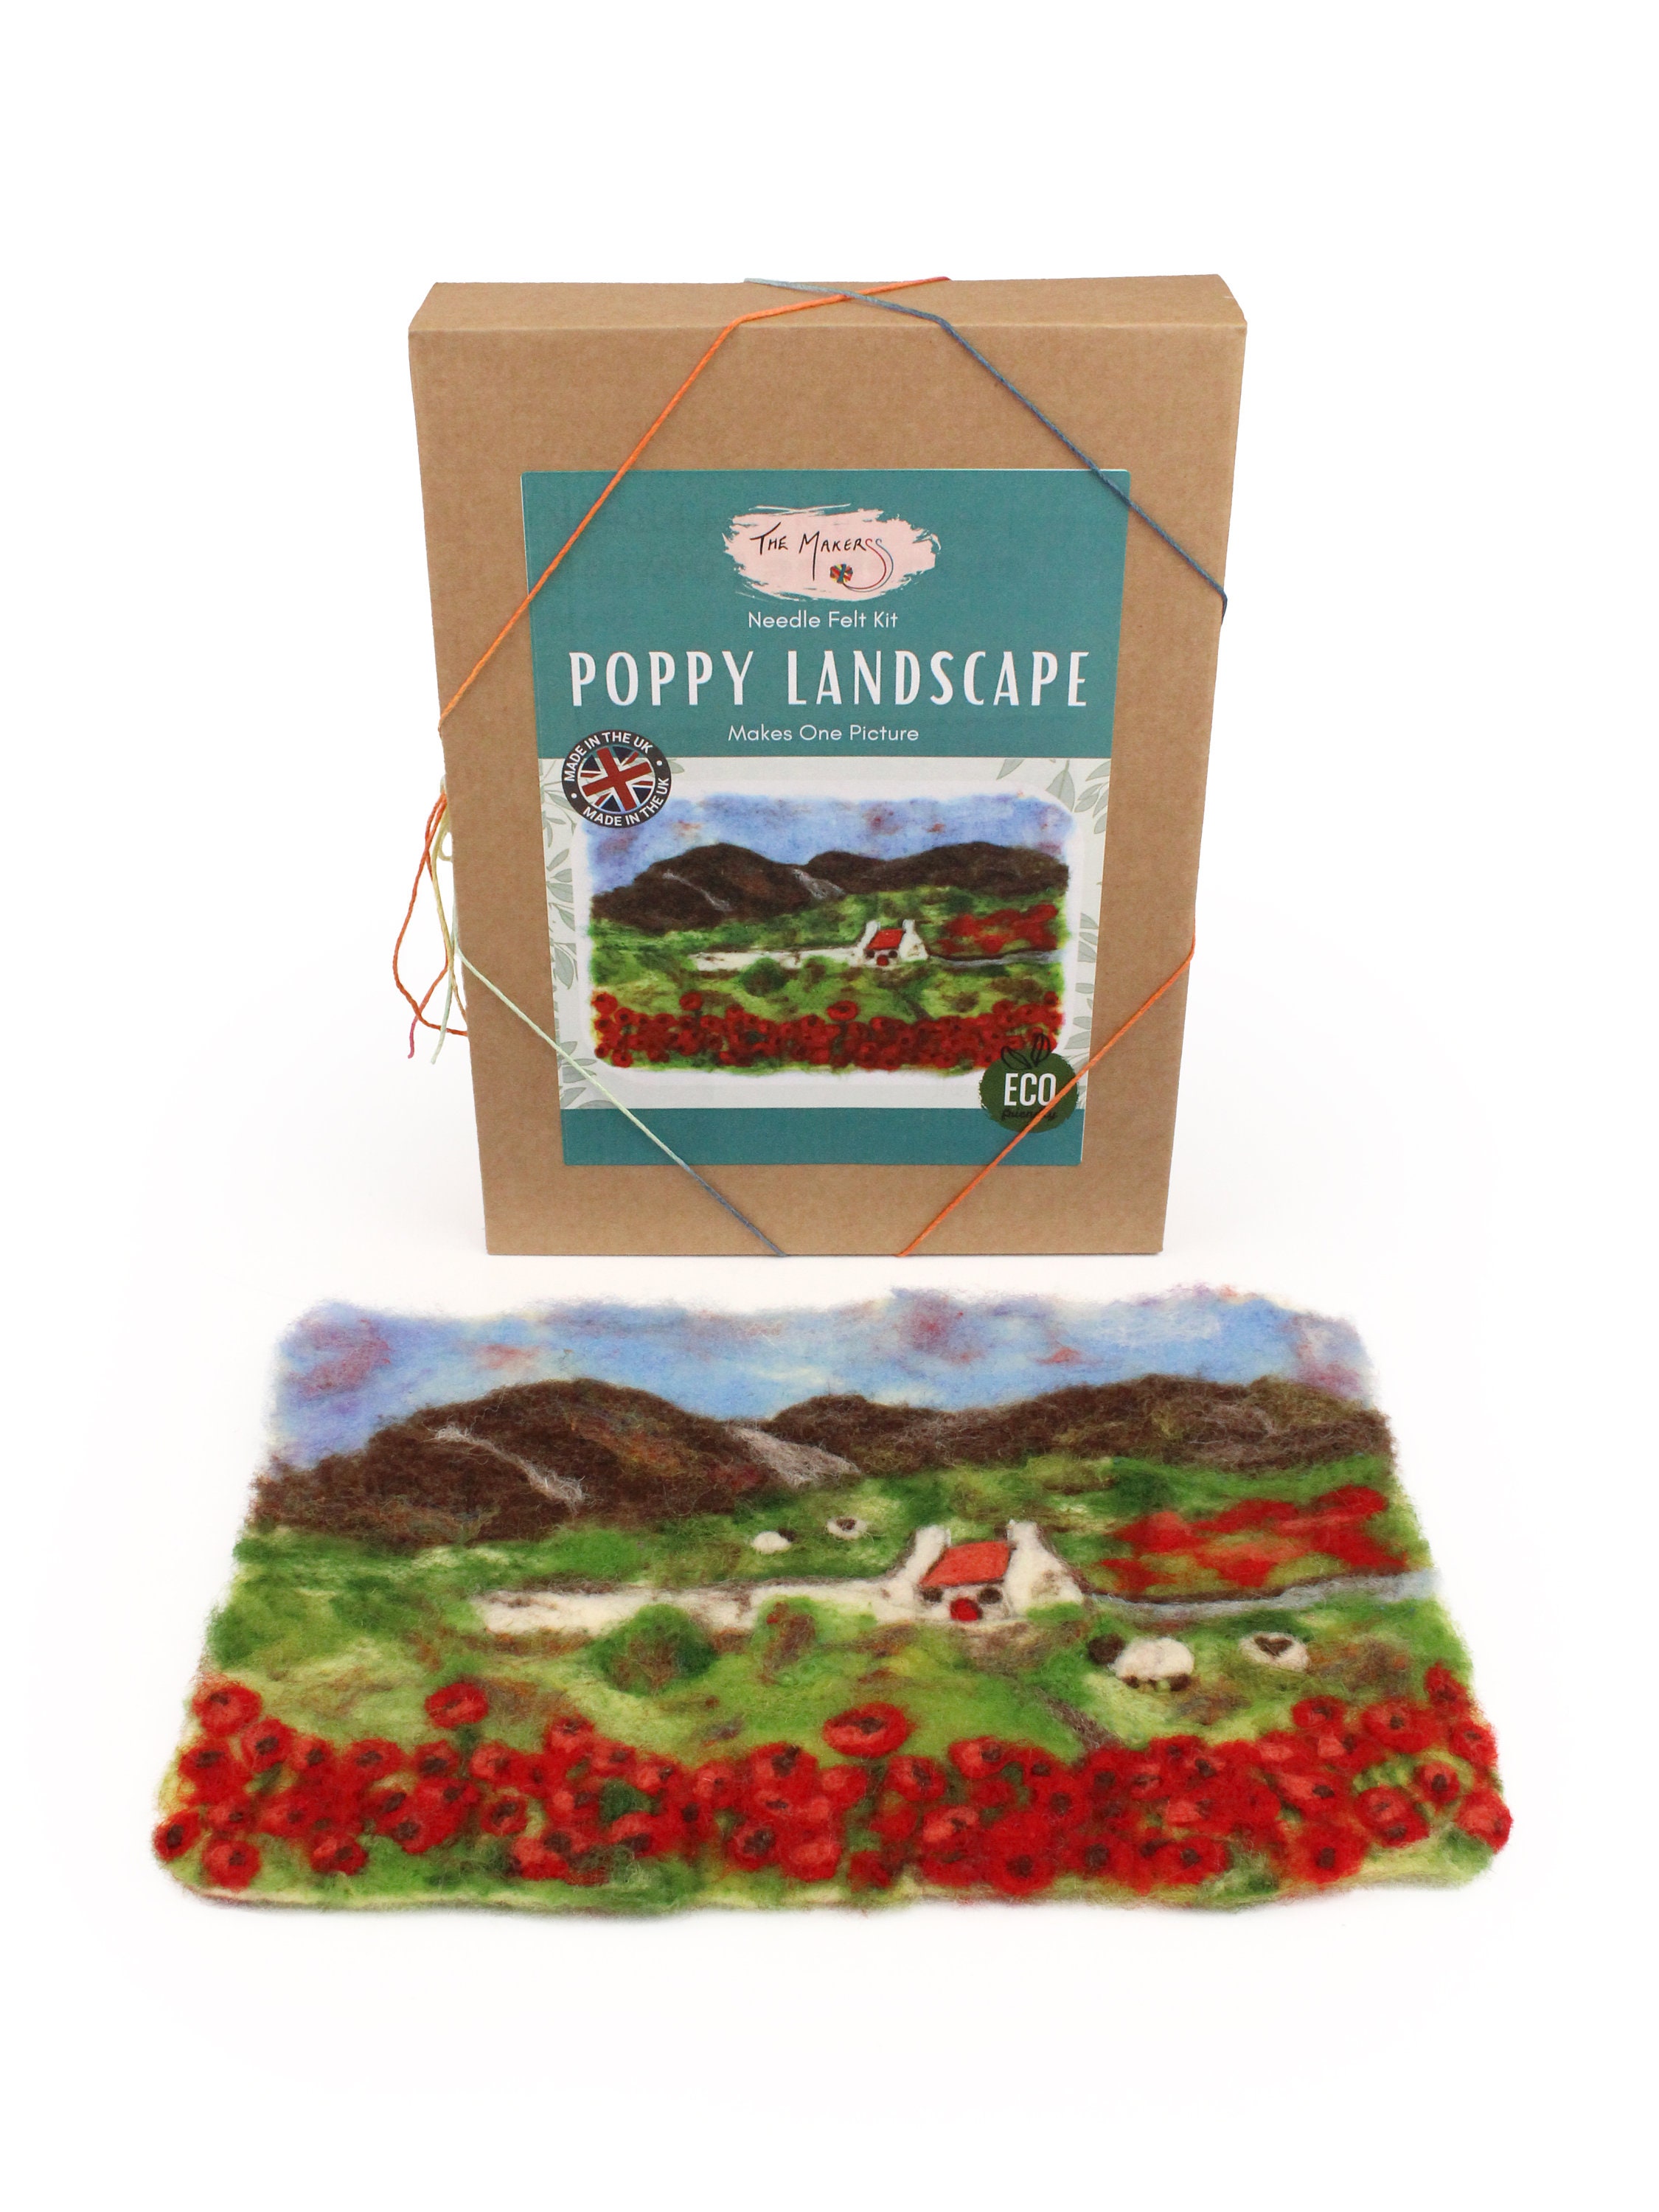 Poppies in a Hoop Needle Felting Kit — World Cup Cafe & Fair Trade Market